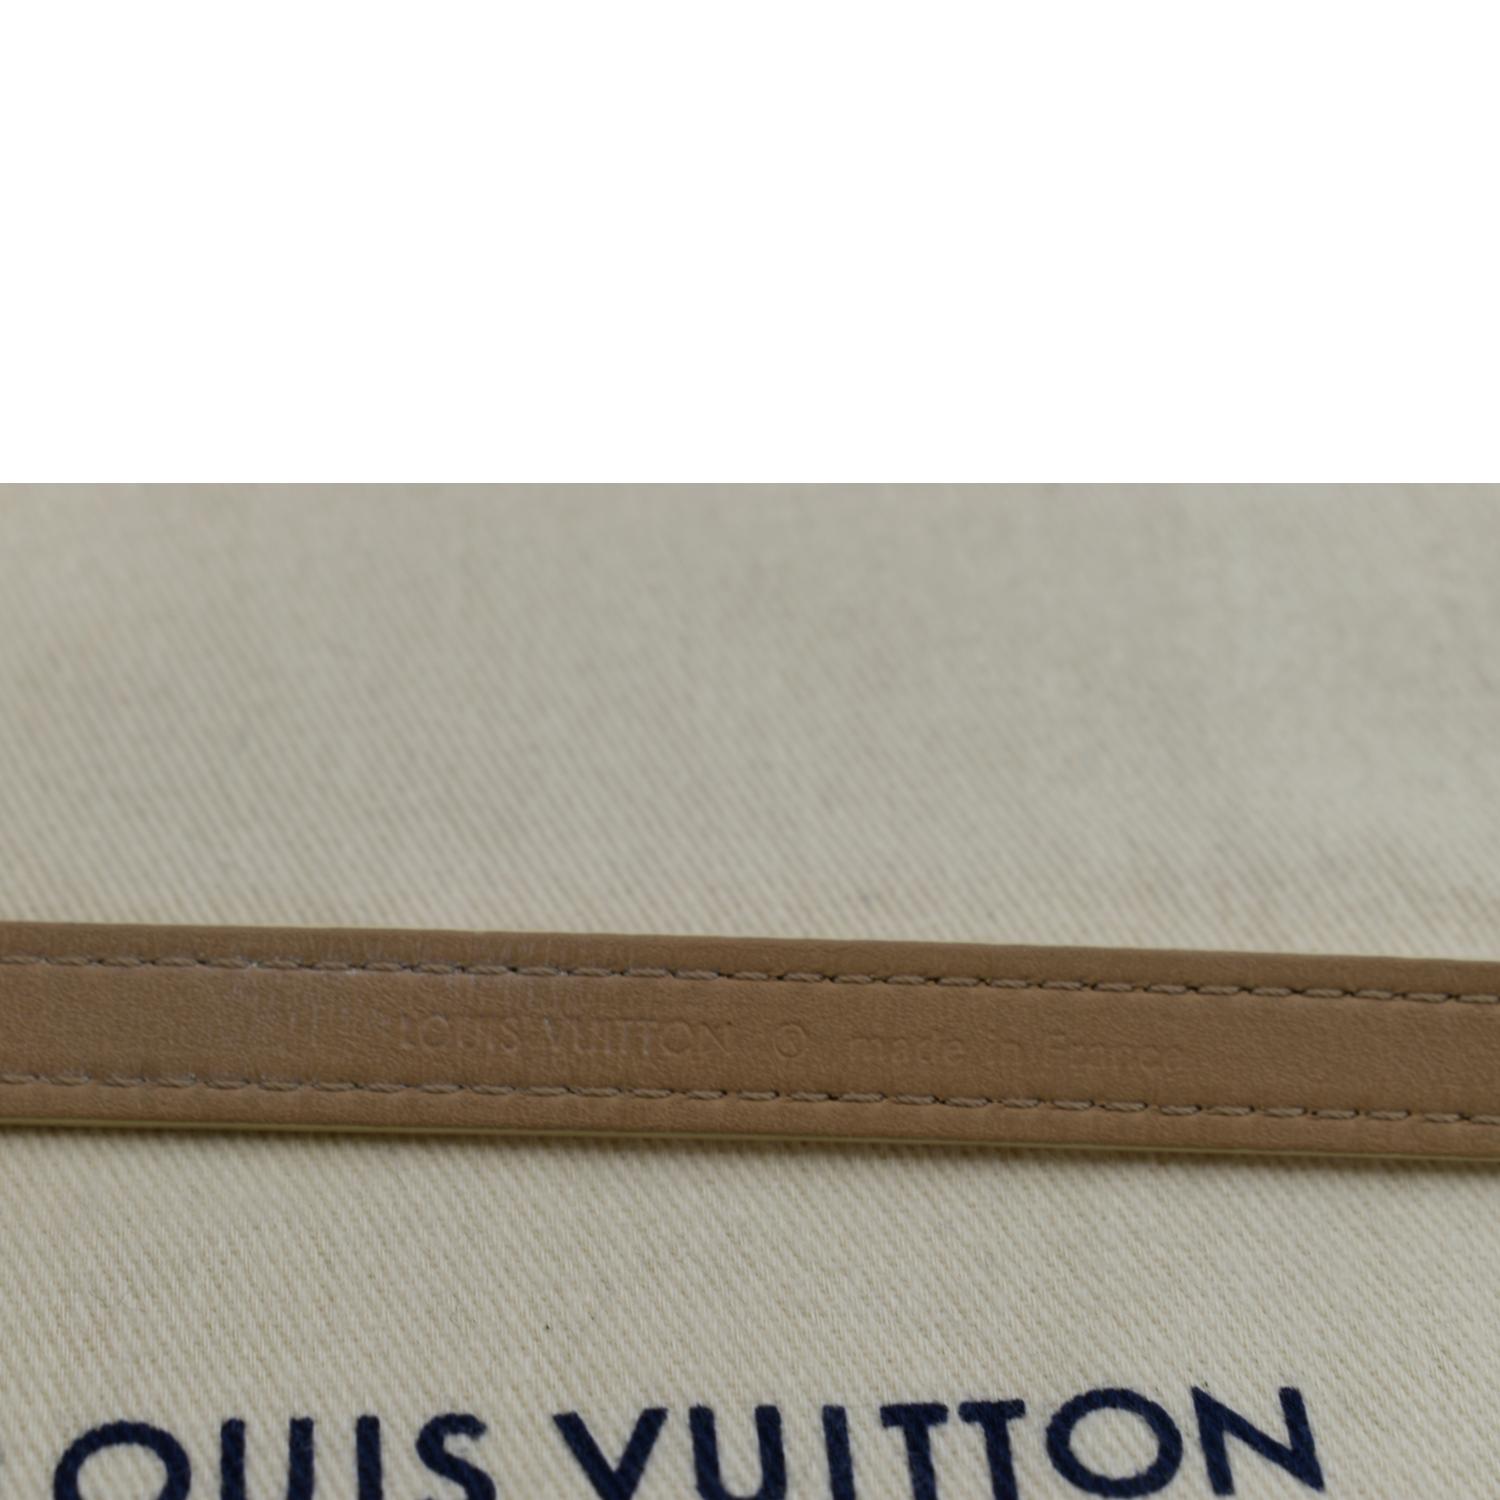 Louis Vuitton - Authenticated Bracelet - Leather Beige for Women, Very Good Condition